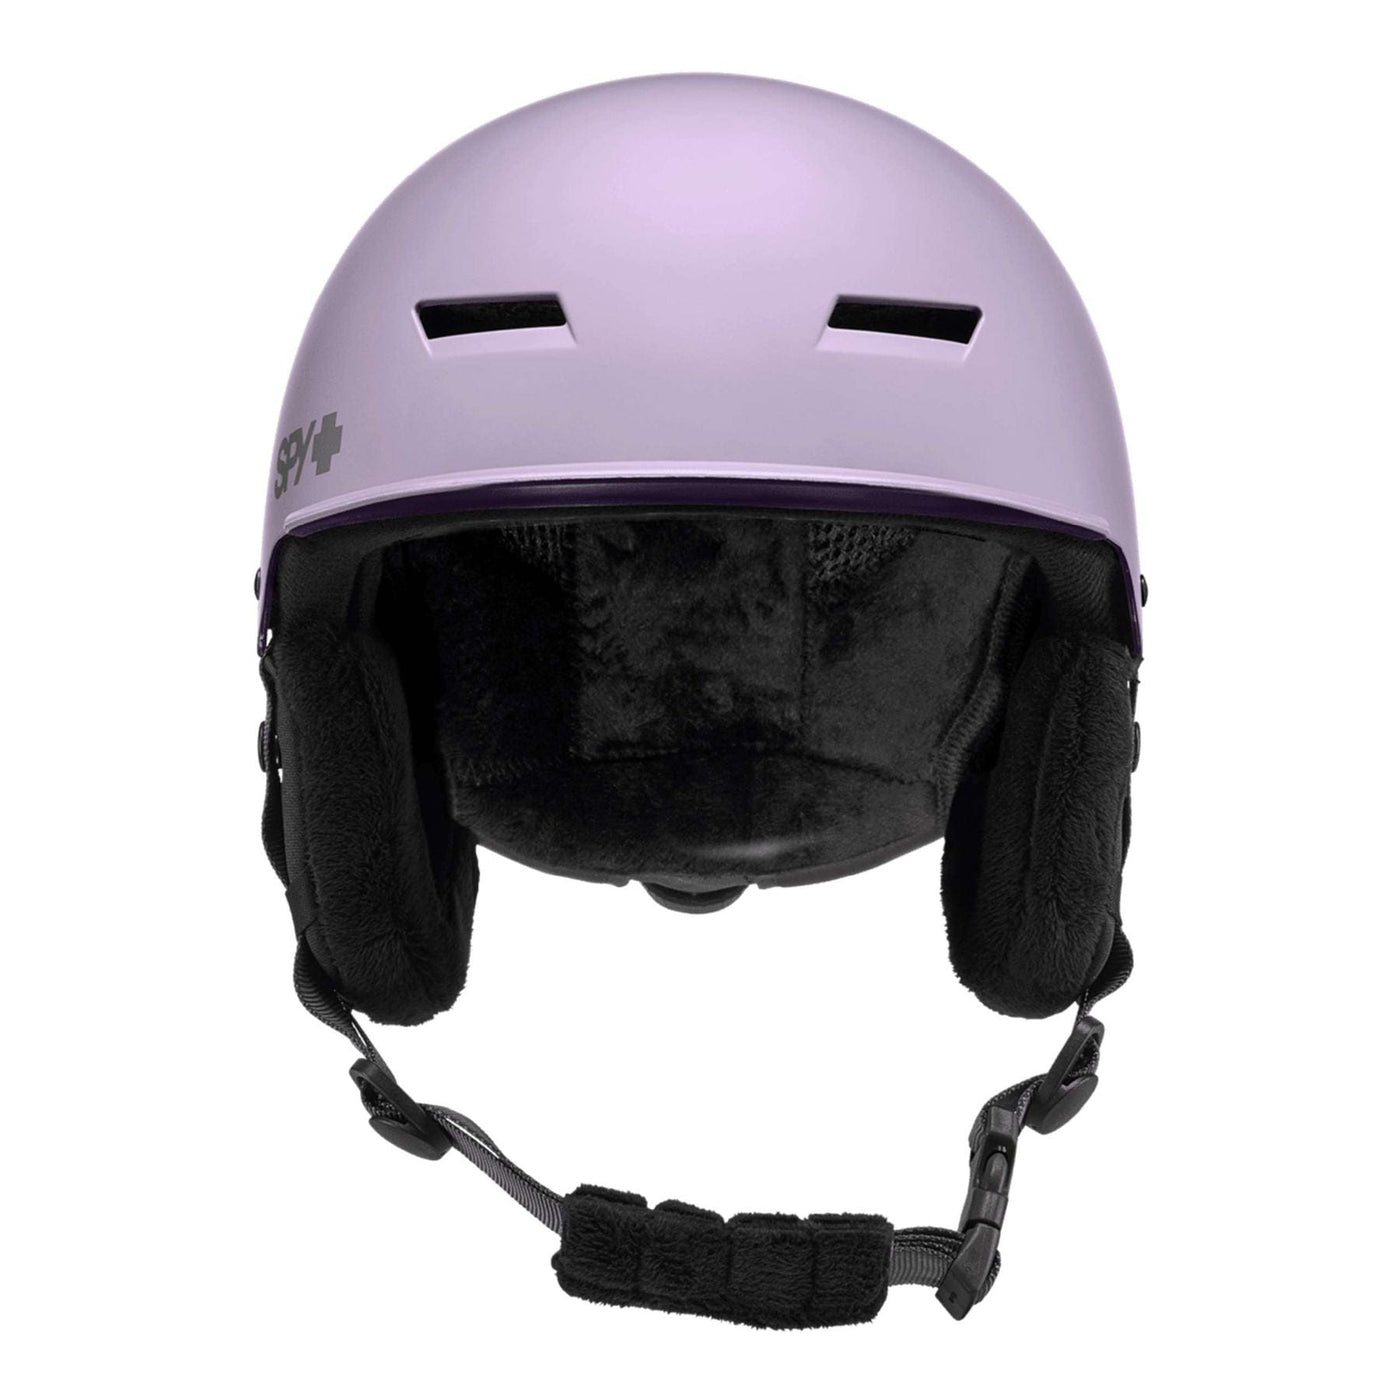 SPY Youth Snow Helmet Lil Galactic with MIPS - Matte Lilac 8Lines Shop - Fast Shipping